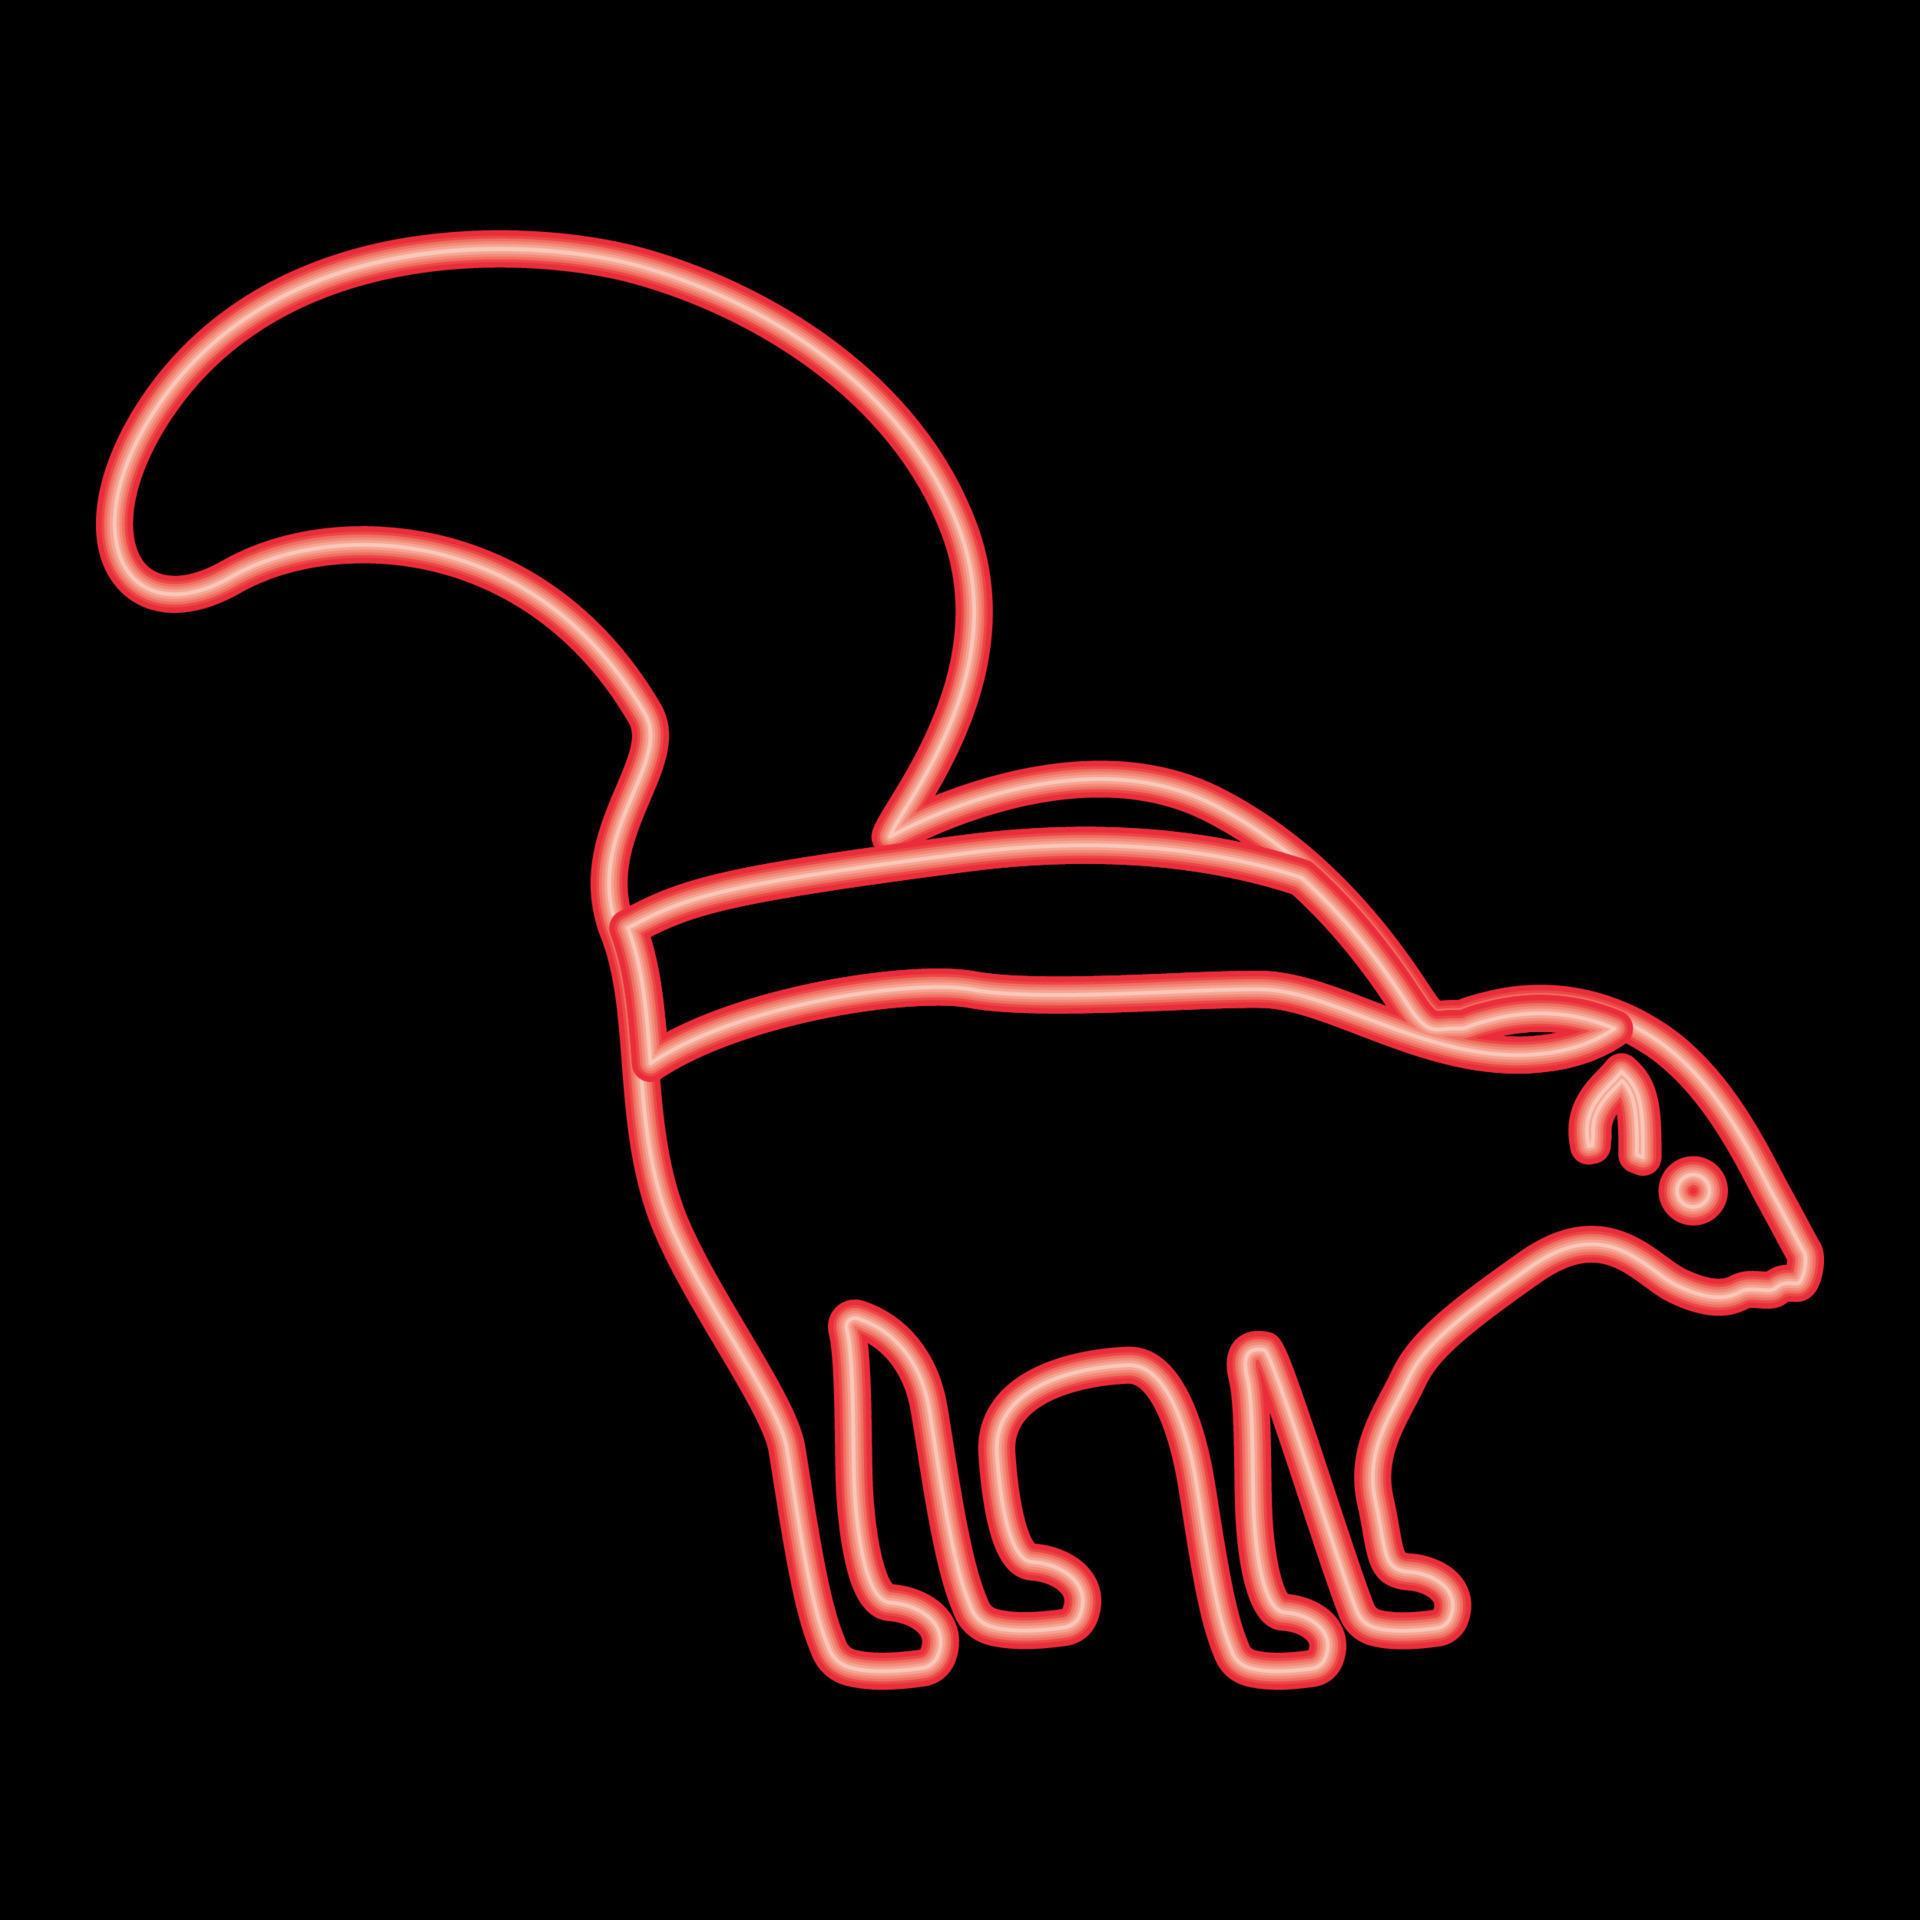 Neon skunk red color vector illustration image flat style 7450968 ...